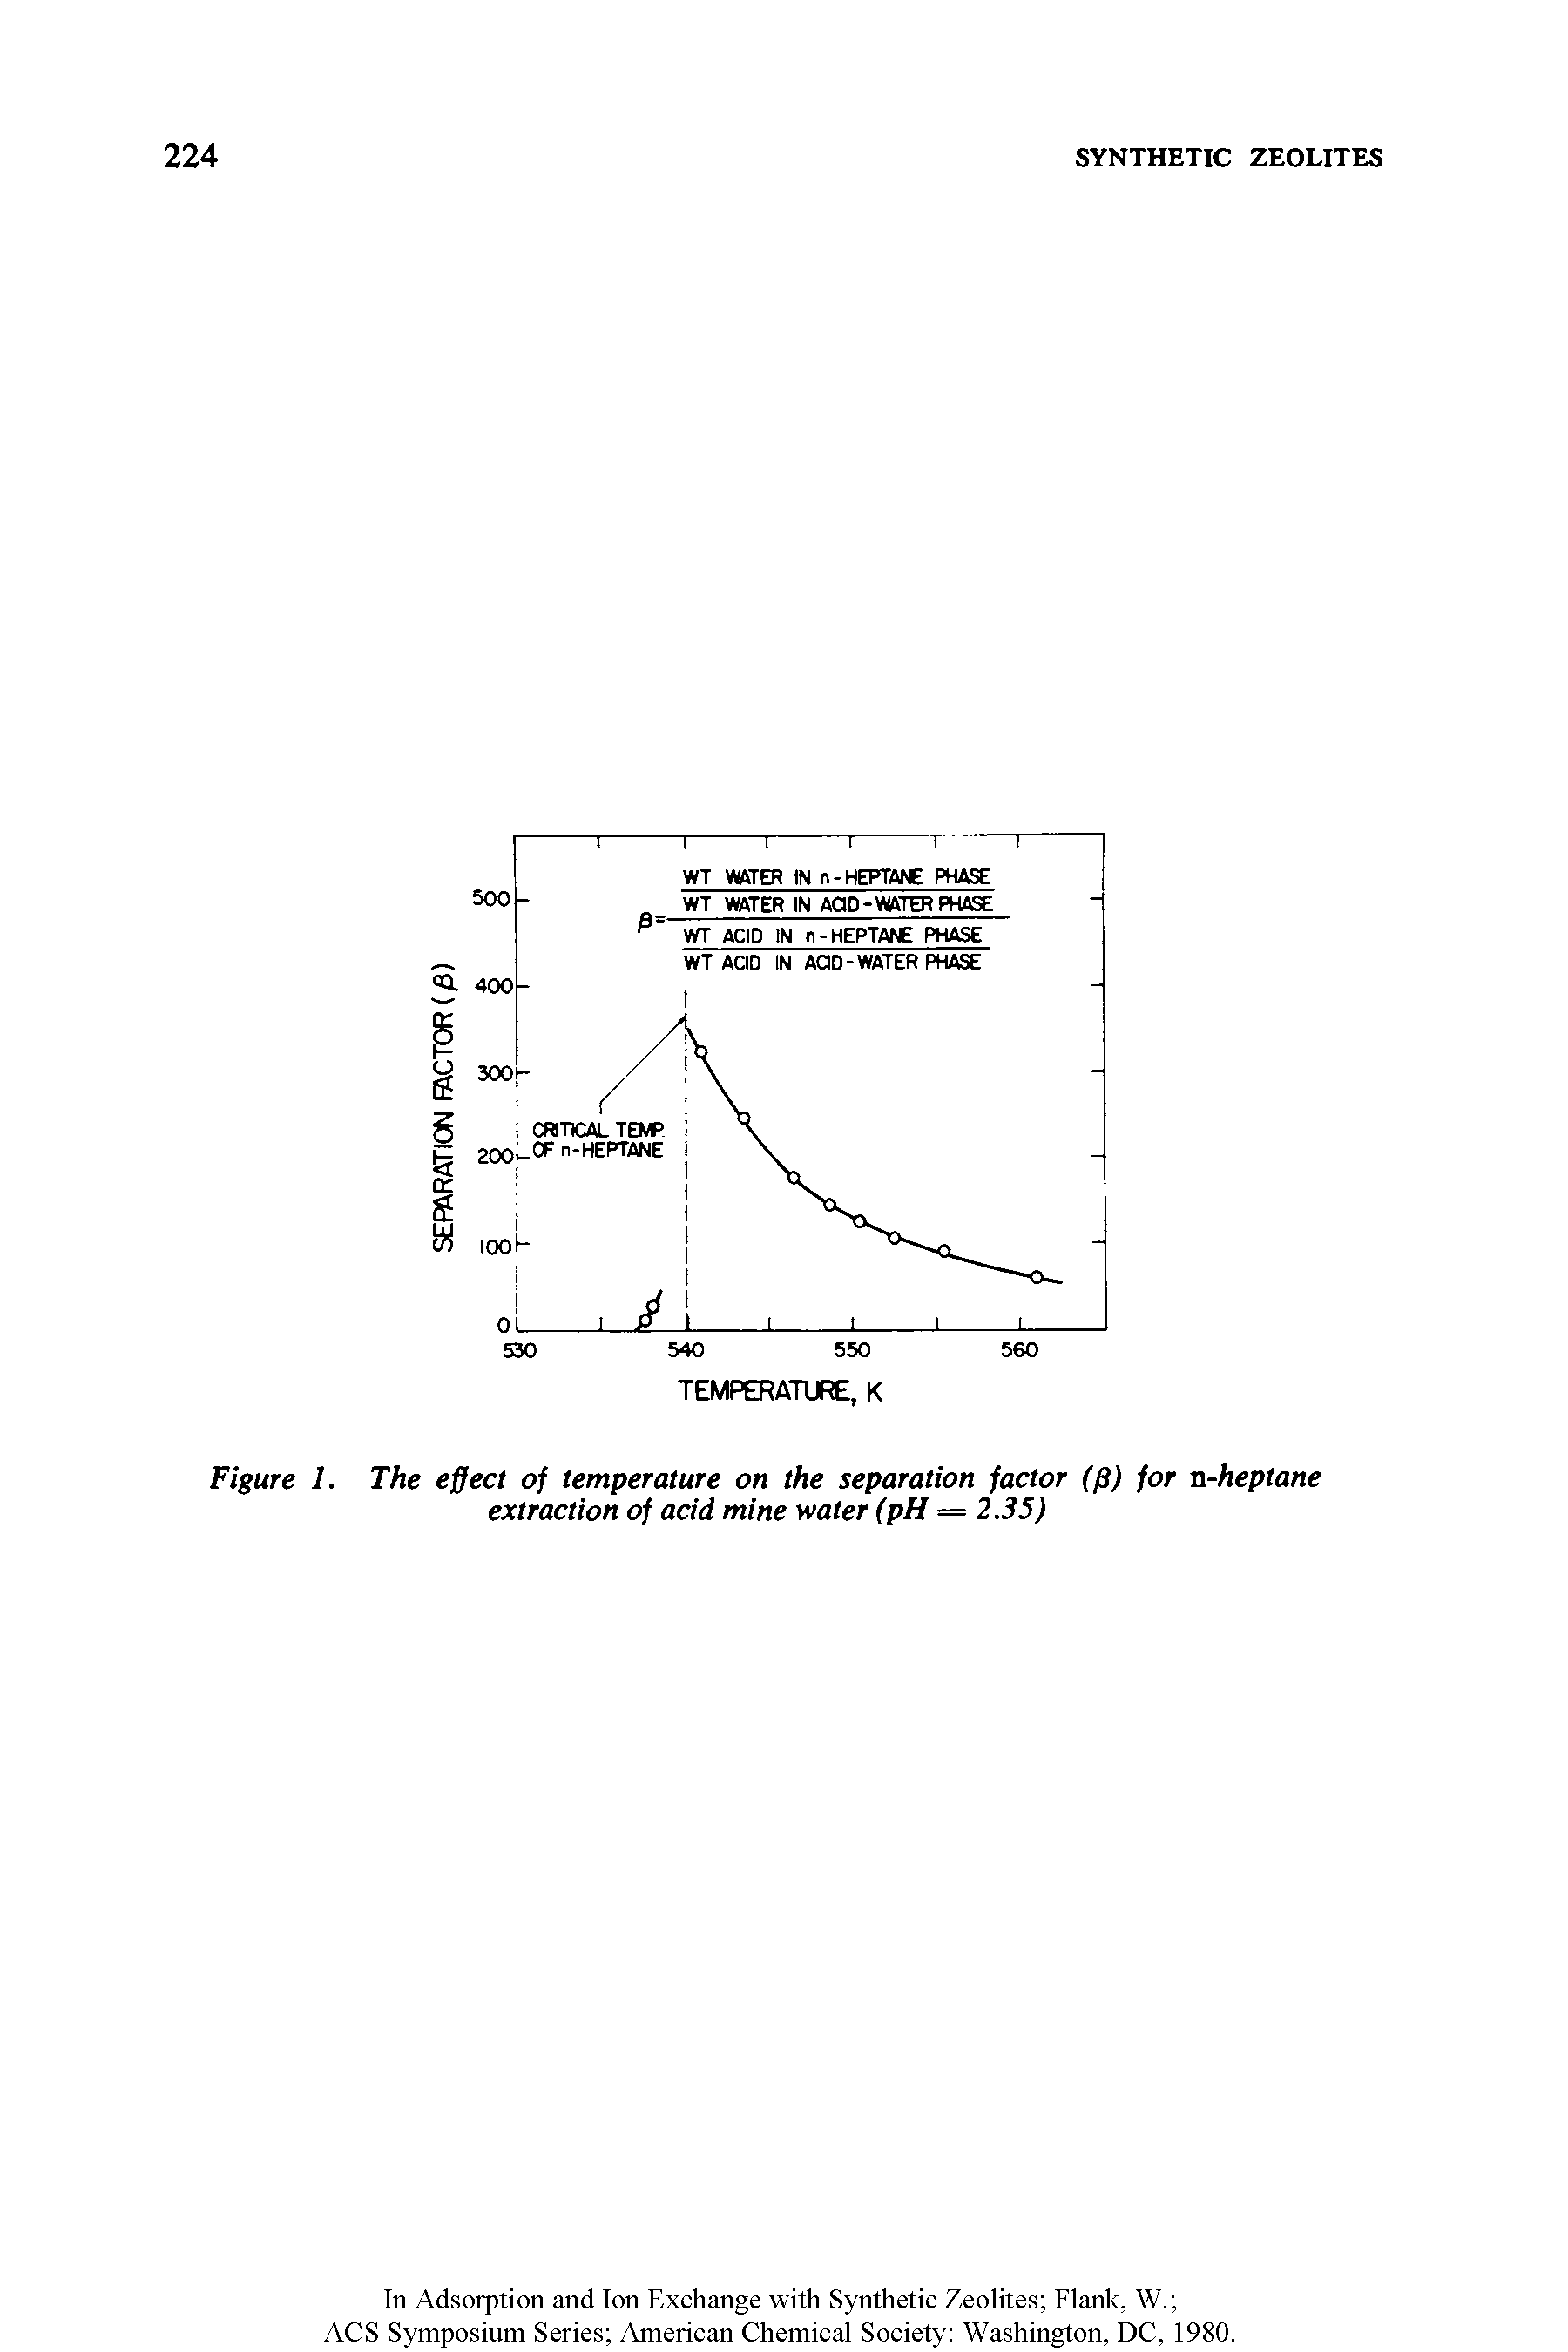 Figure 1. The effect of temperature on the separation factor (ff) for n-heptane extraction of acid mine water (pH = 2.35)...